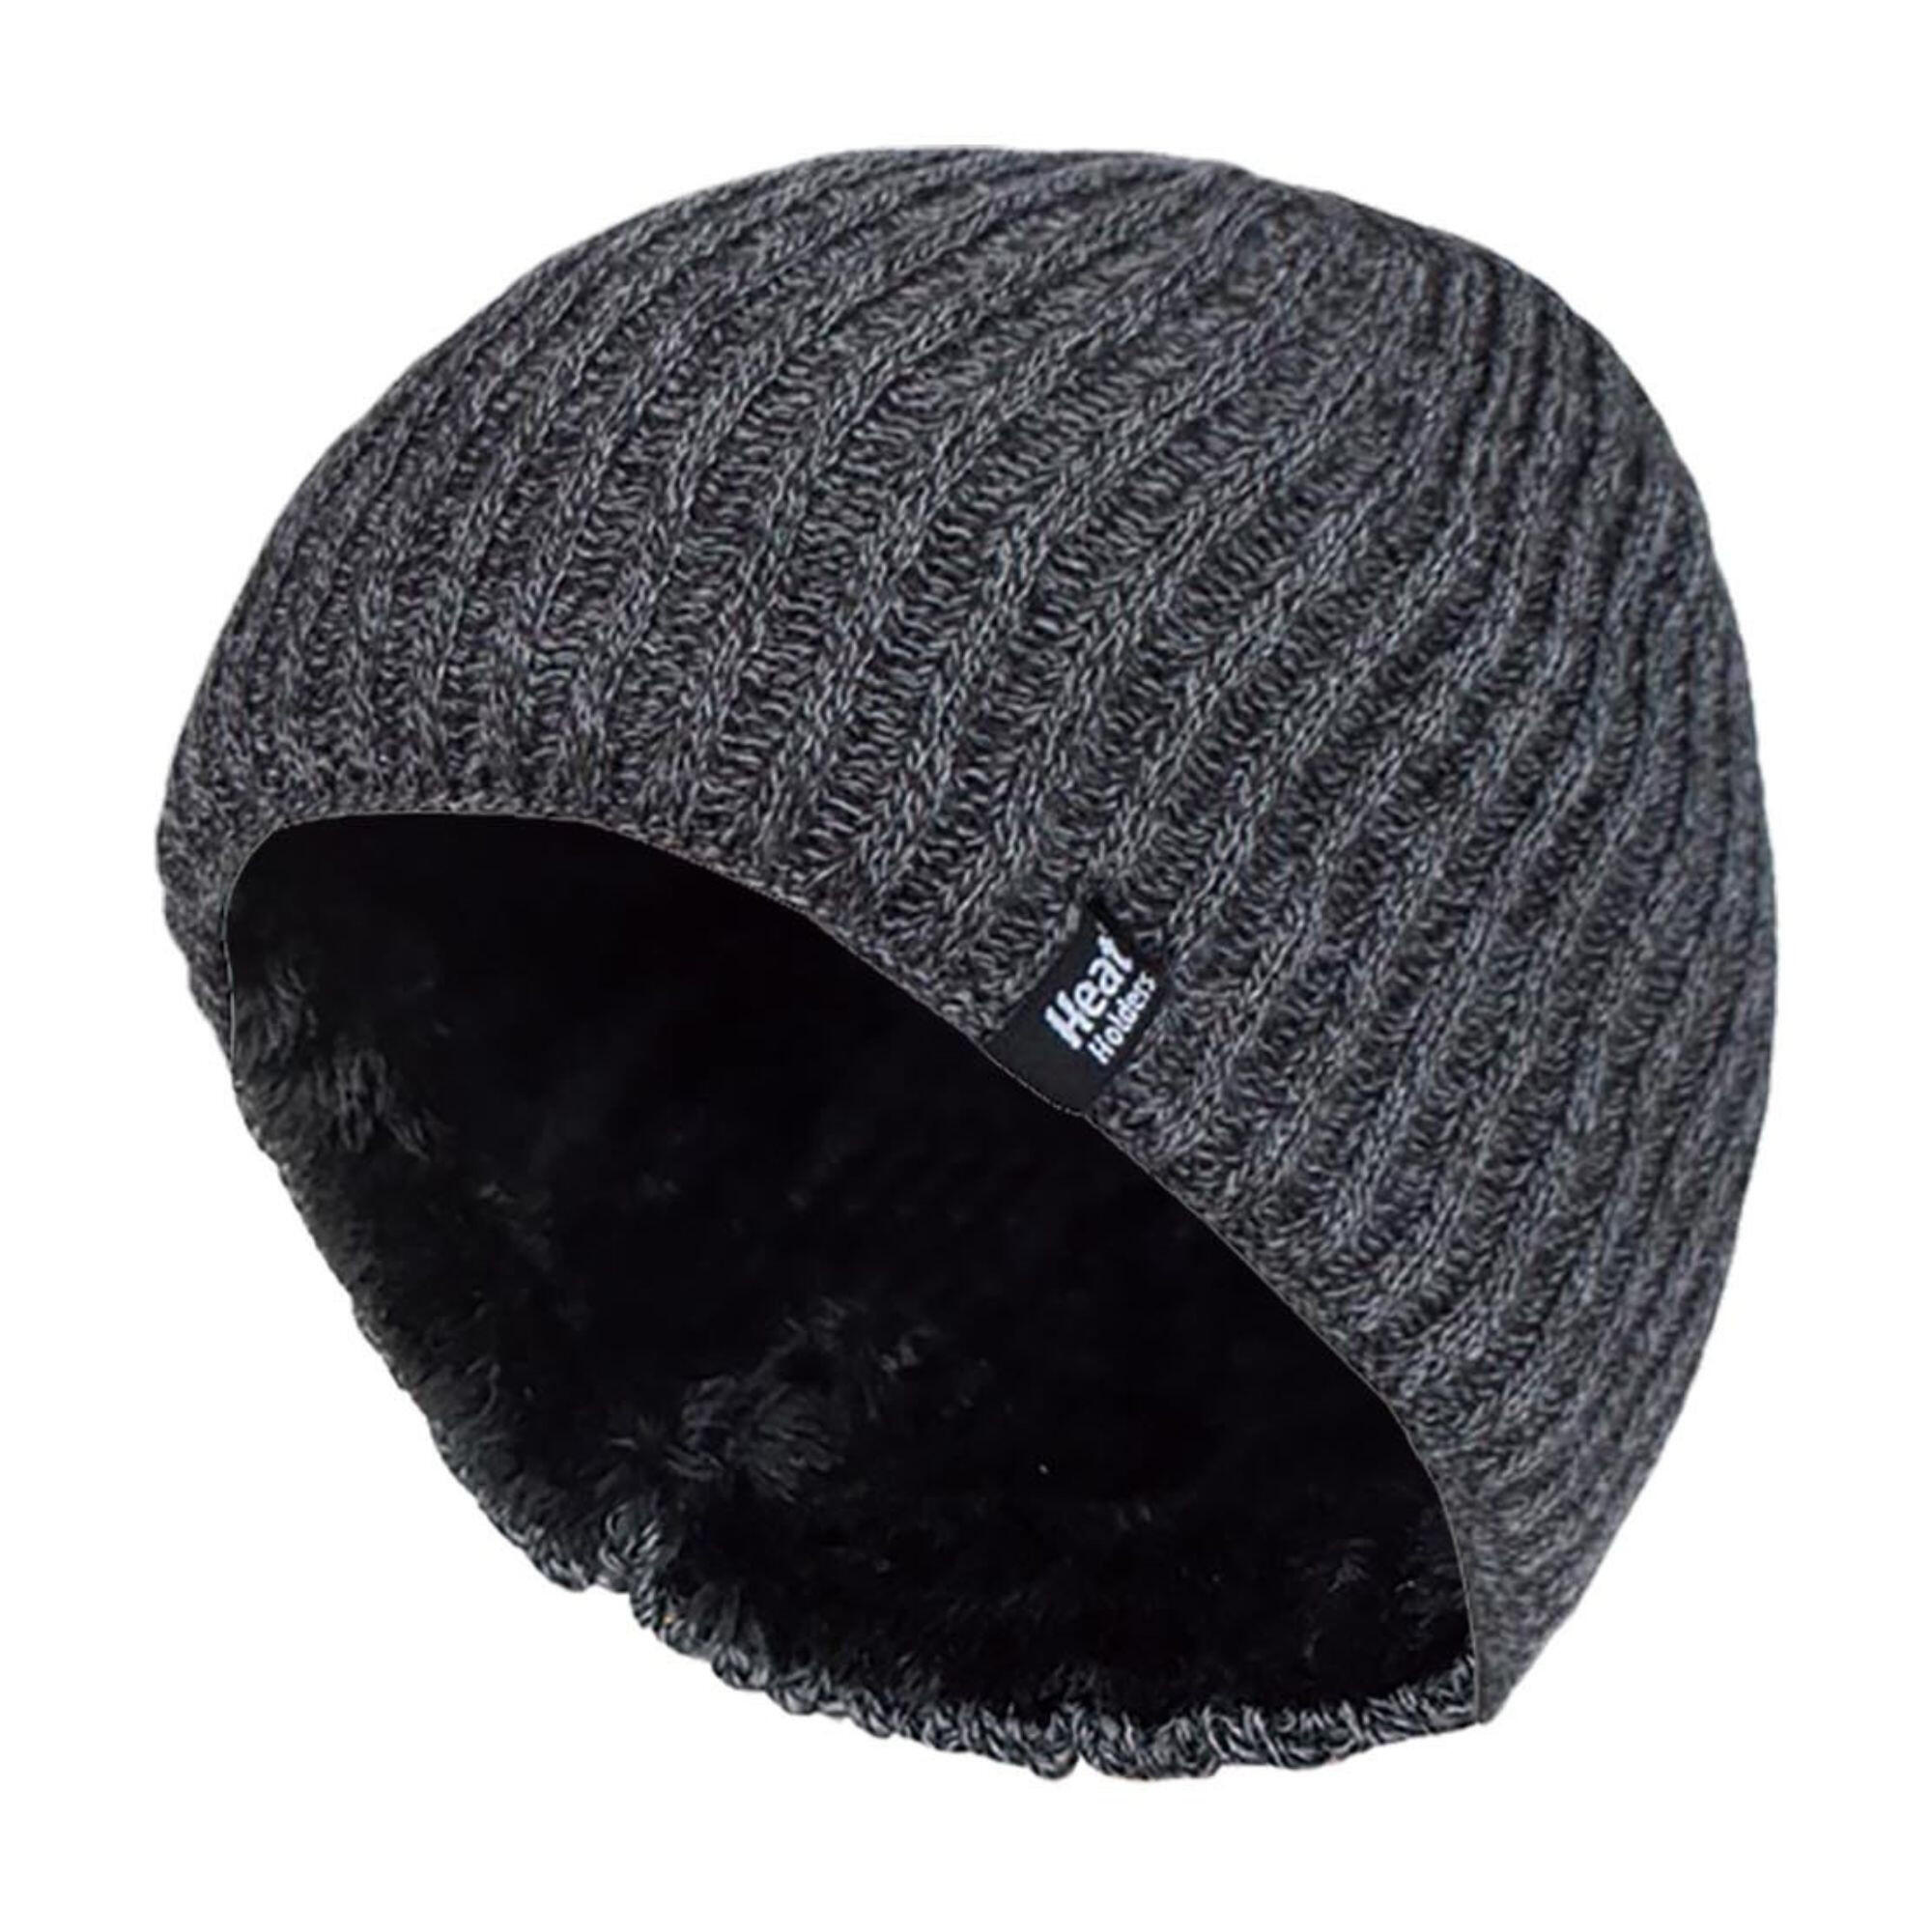 Mens Fleece Lined Thermal Winter Knitted Beanie Hat 1/4